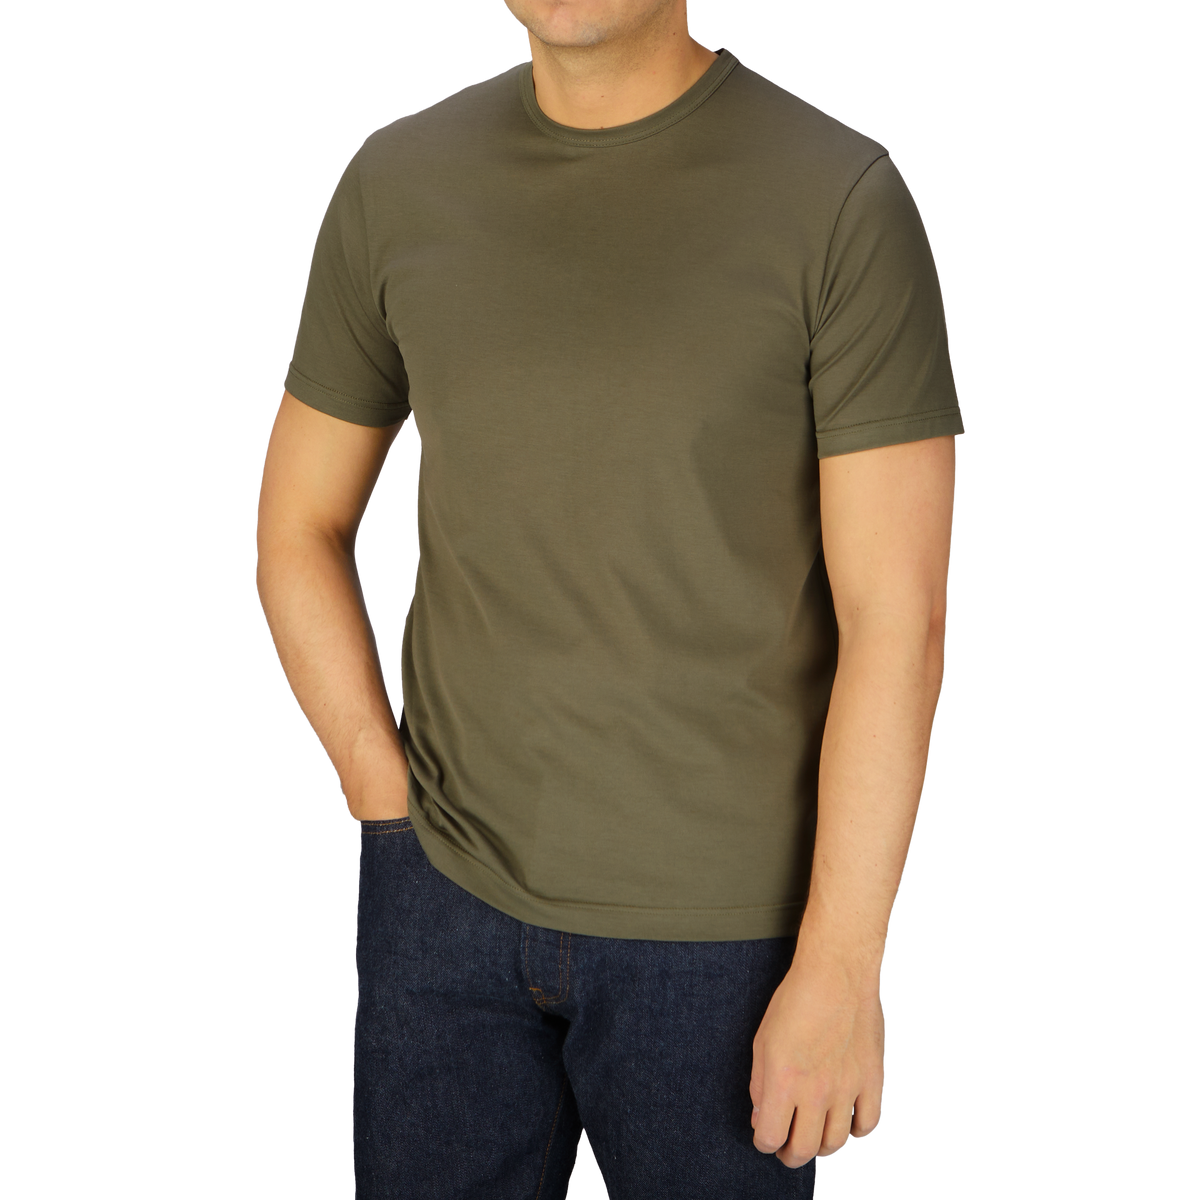 A man in a Sunspel Khaki Green Classic Cotton T-Shirt and jeans made of cotton.